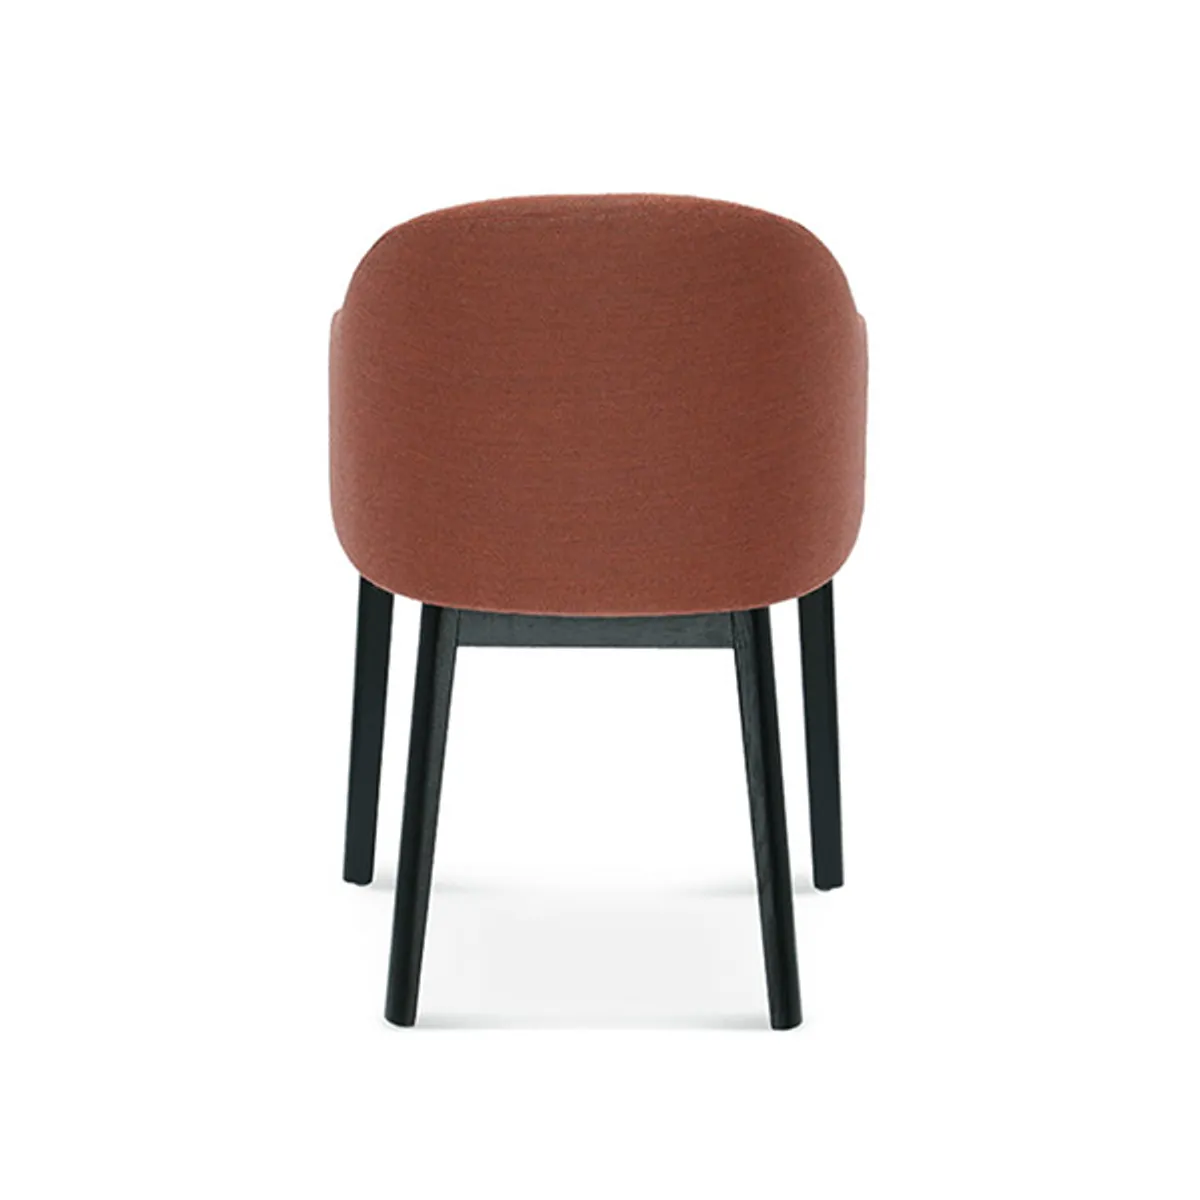 Luca Armchair Upholstered For Commercial Use By Insideoutcontracts 020